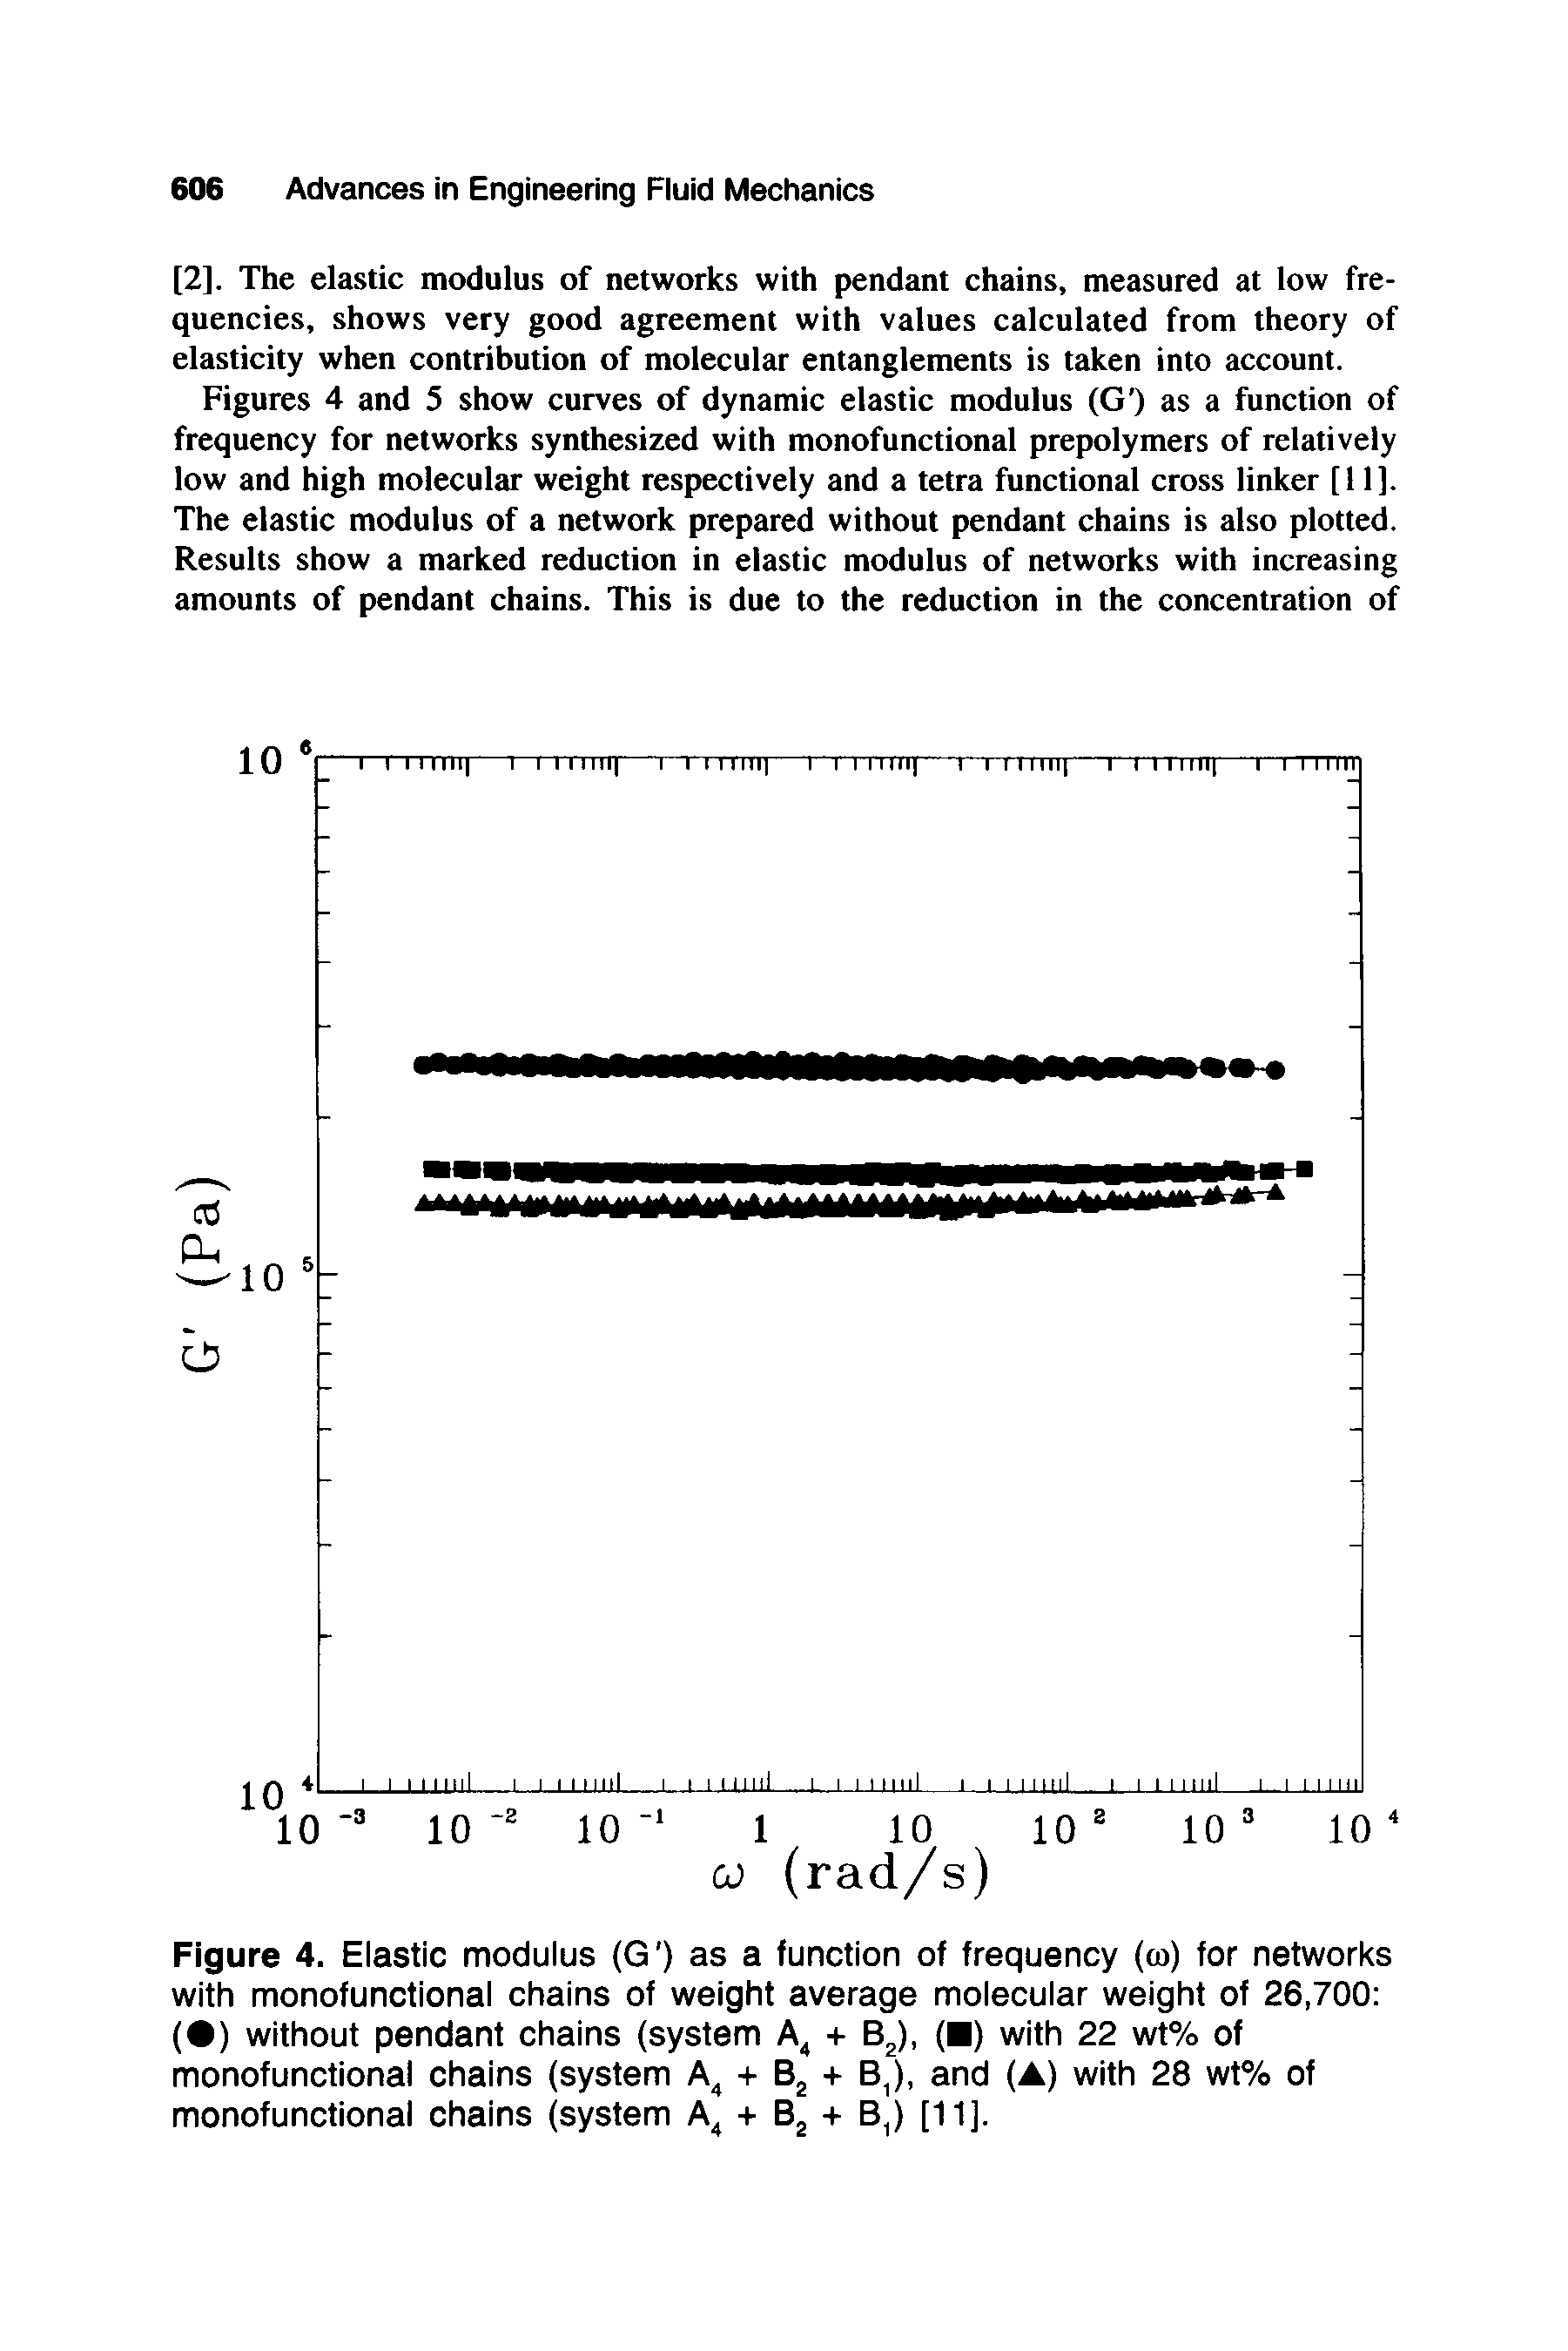 Figures 4 and 5 show curves of dynamic elastic modulus (G ) as a function of frequency for networks synthesized with monofunctional prepolymers of relatively low and high molecular weight respectively and a tetra functional cross linker [11]. The elastic modulus of a network prepared without pendant chains is also plotted. Results show a marked reduction in elastic modulus of networks with increasing amounts of pendant chains. This is due to the reduction in the concentration of...